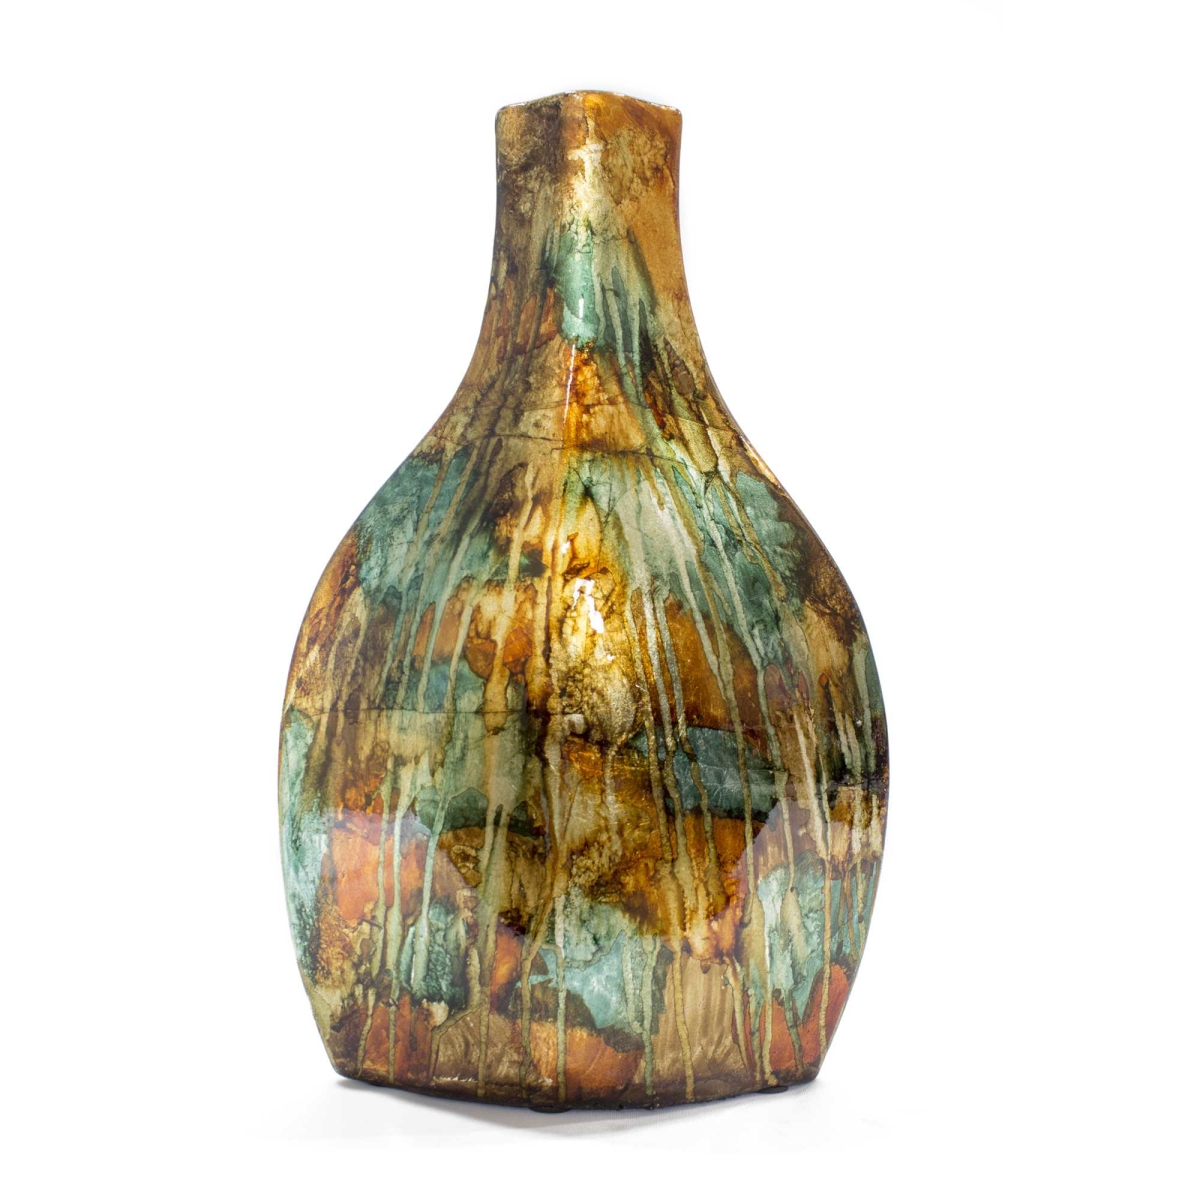 Home Roots Beddings 328610 Ceramic Table Vase, Copper, Red & Gold - 16 In.